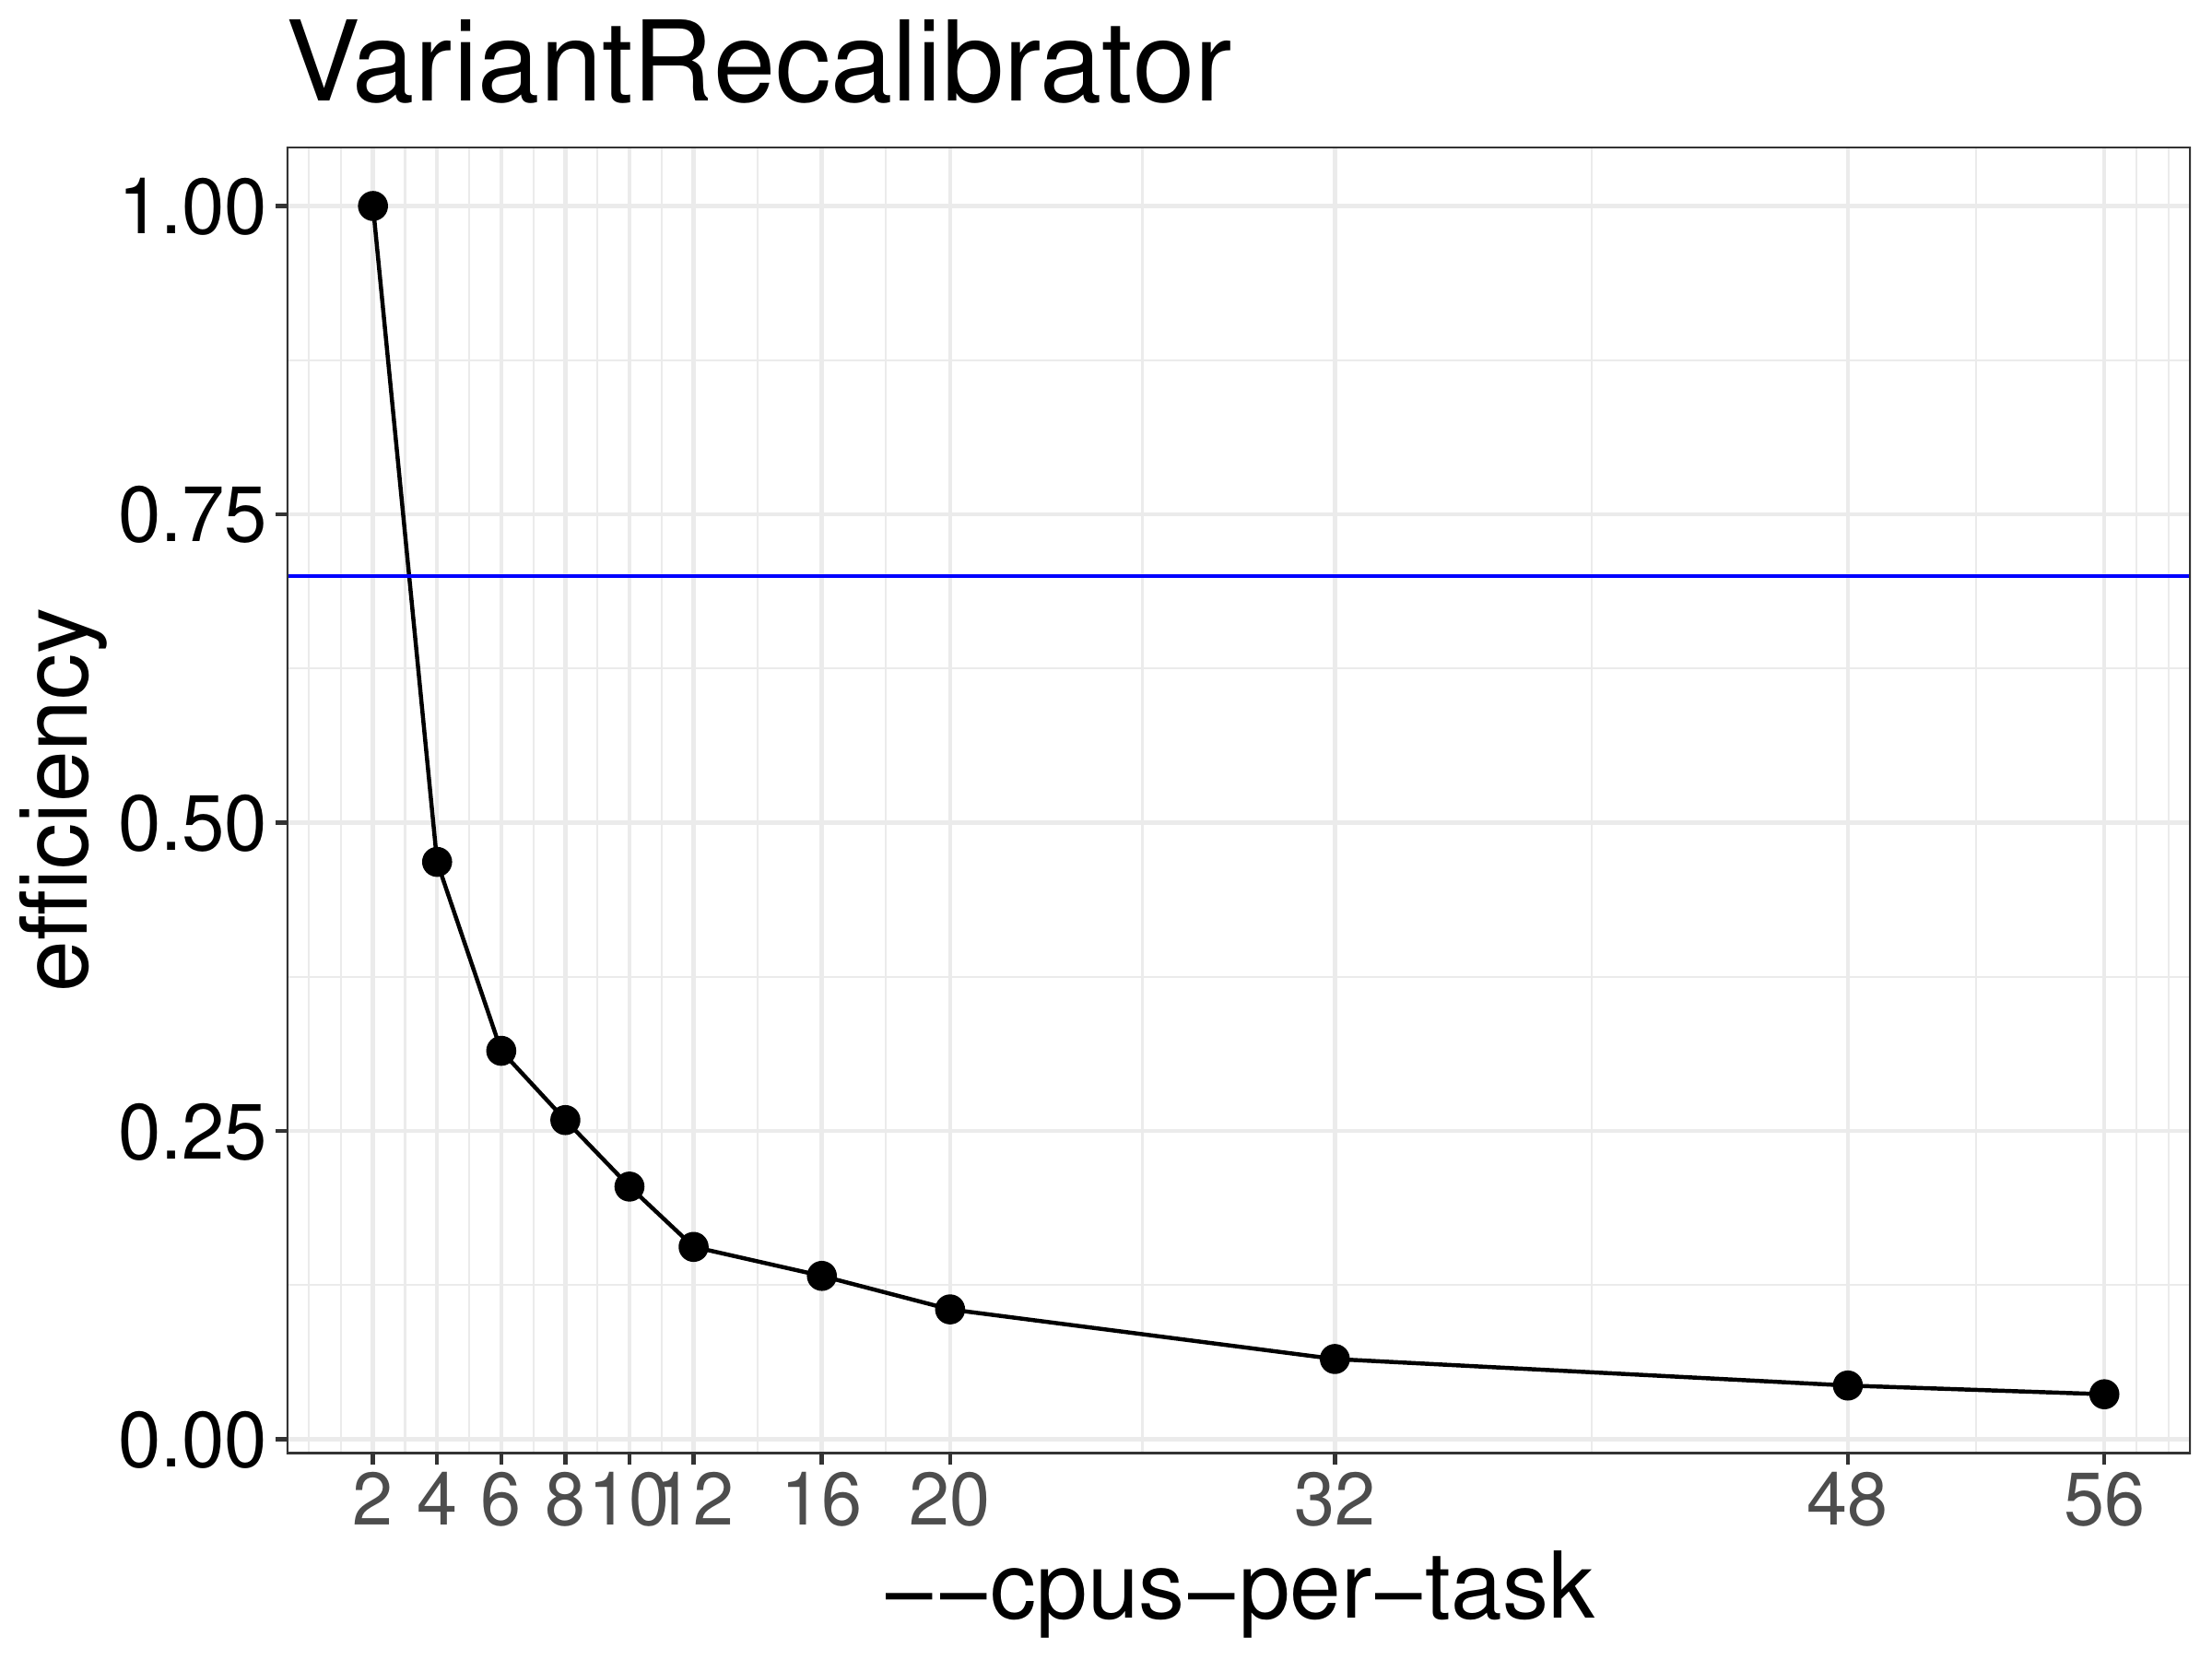 Efficiency of VariantRecalibrator as a function of the number of threads